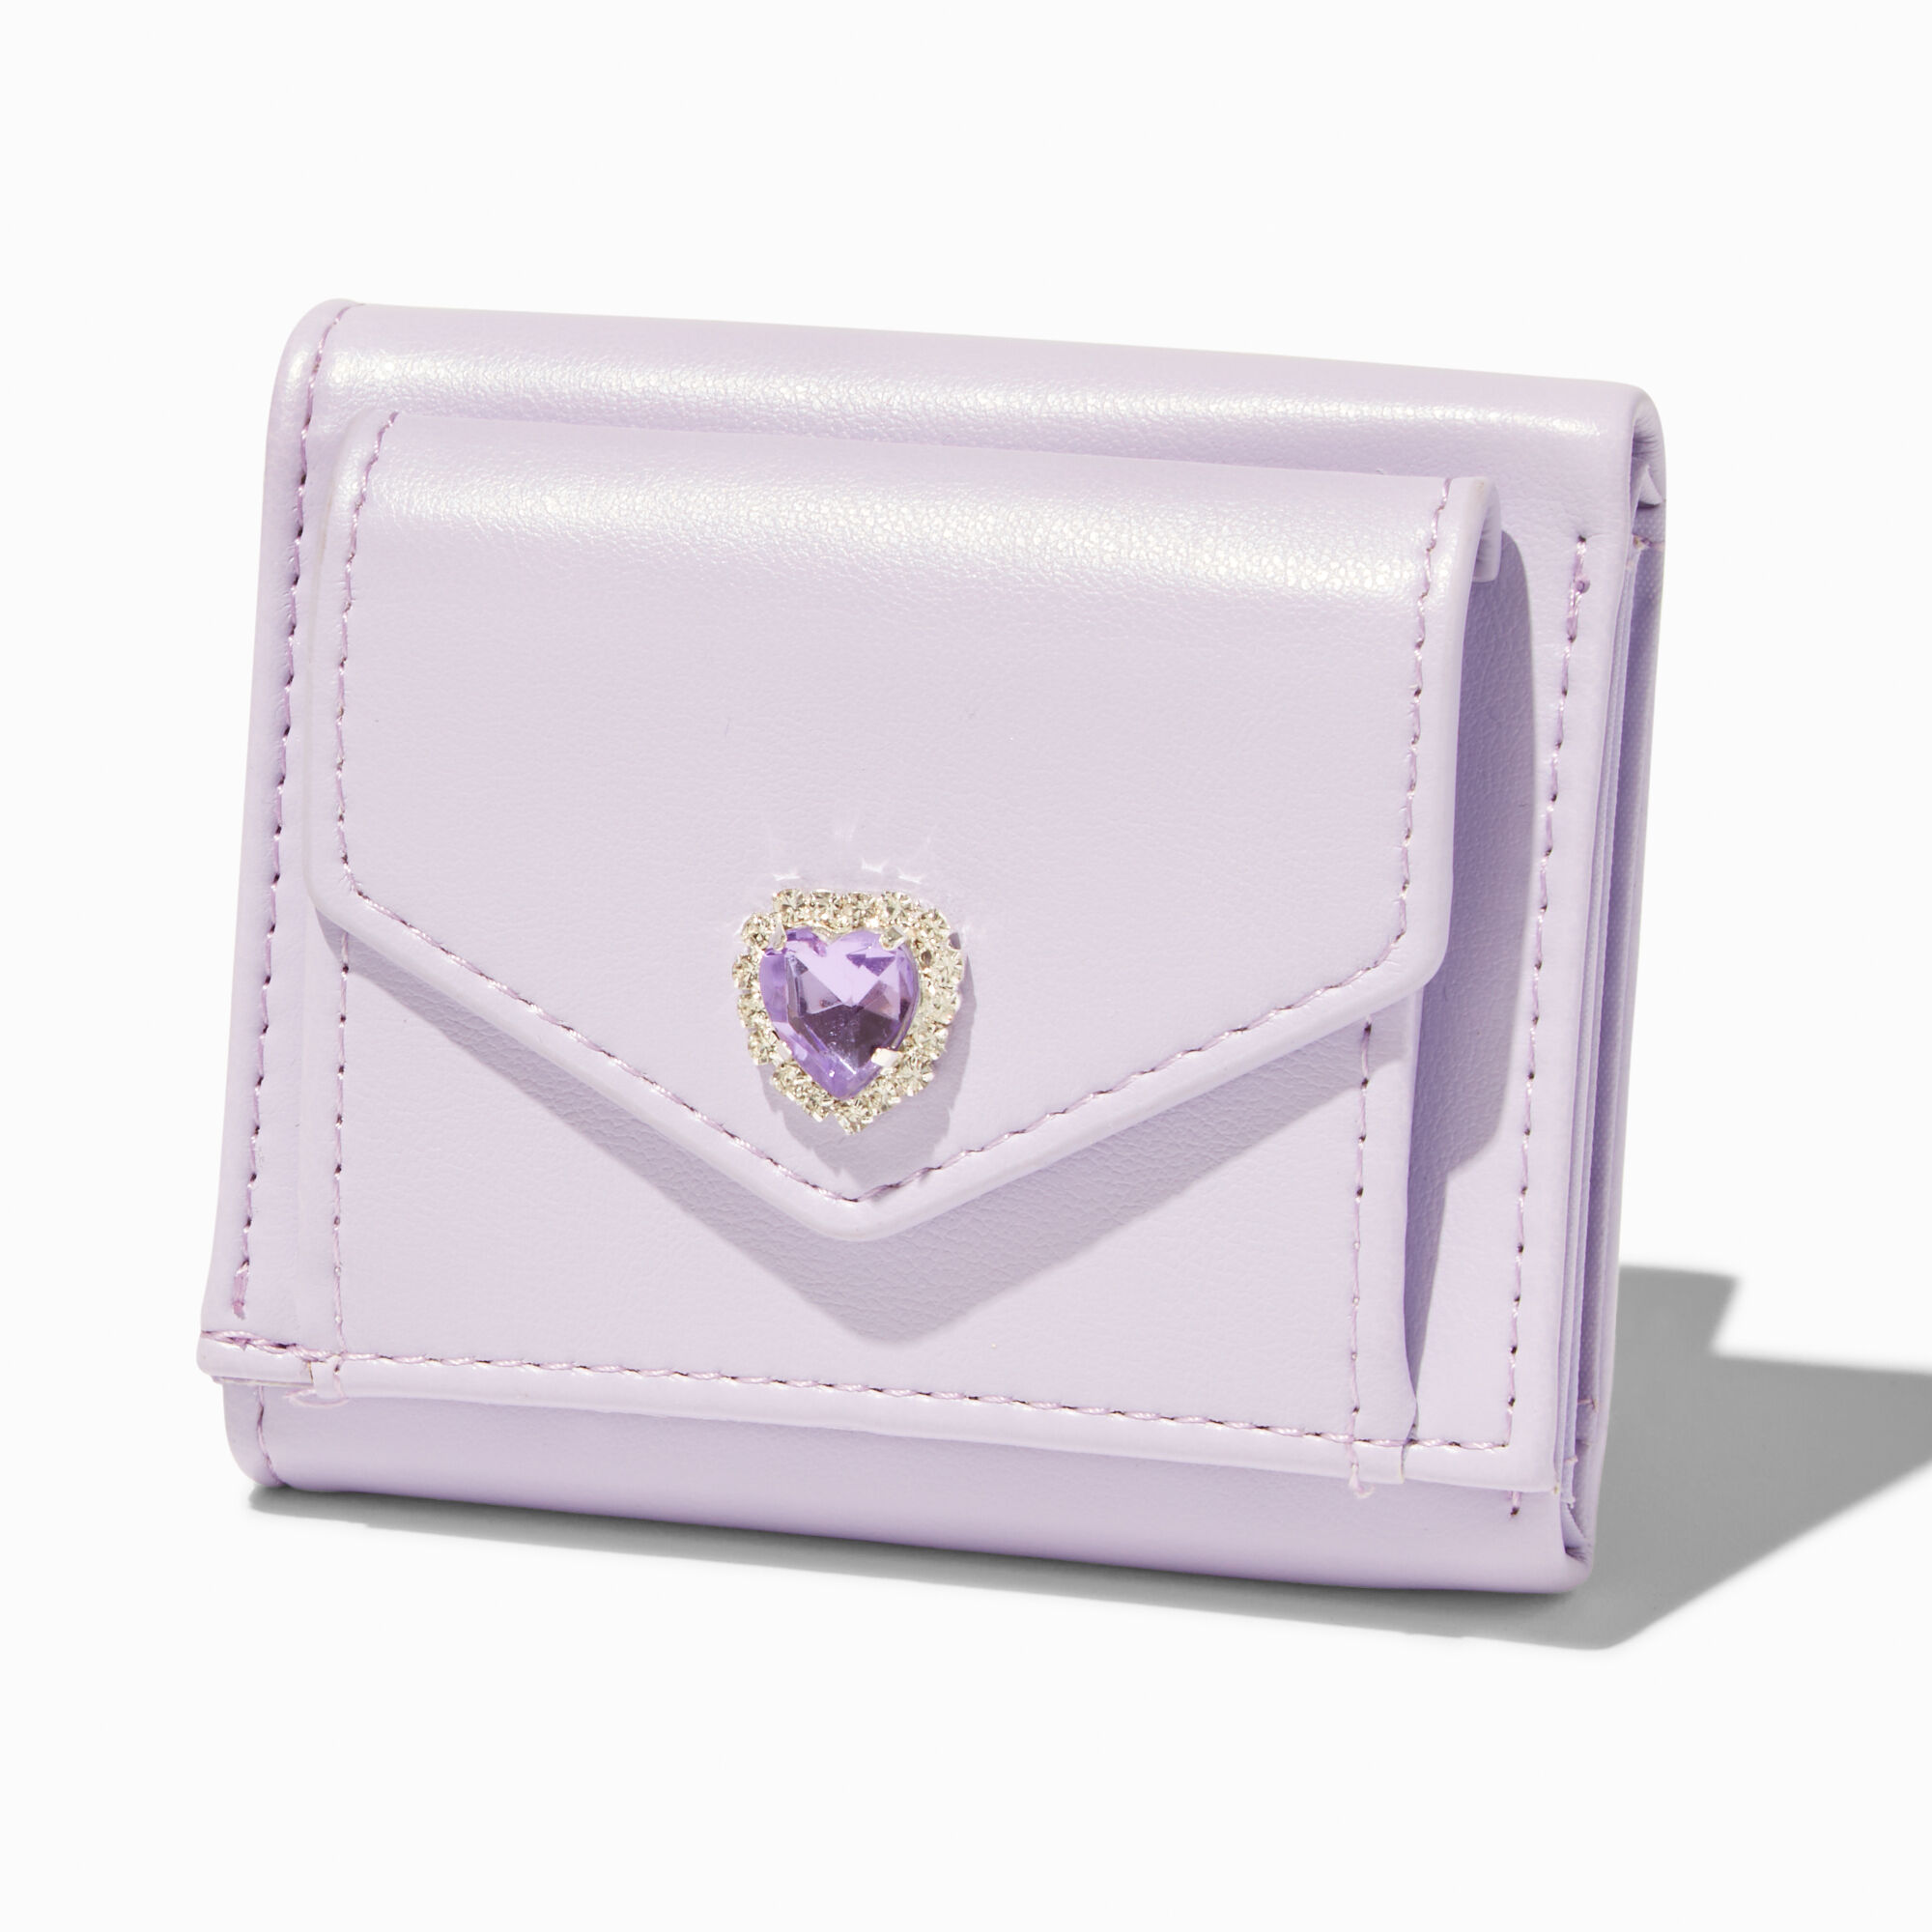 View Claires Heart Gemstone Lavender Trifold Wallet information